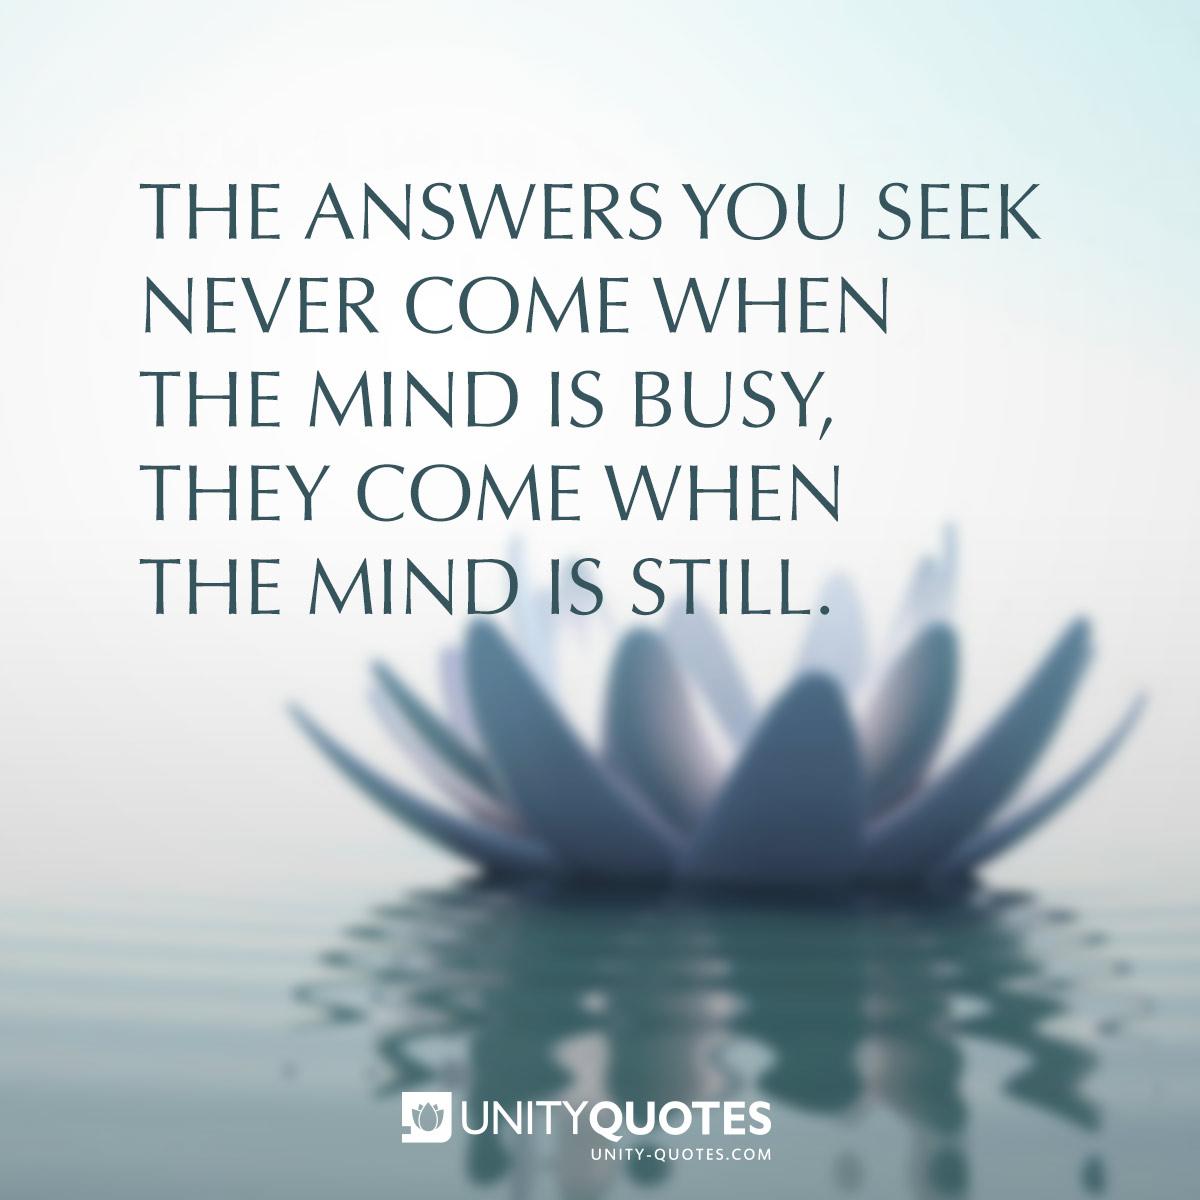 the answers you seek never come when the mind is busy they come when the mind is still